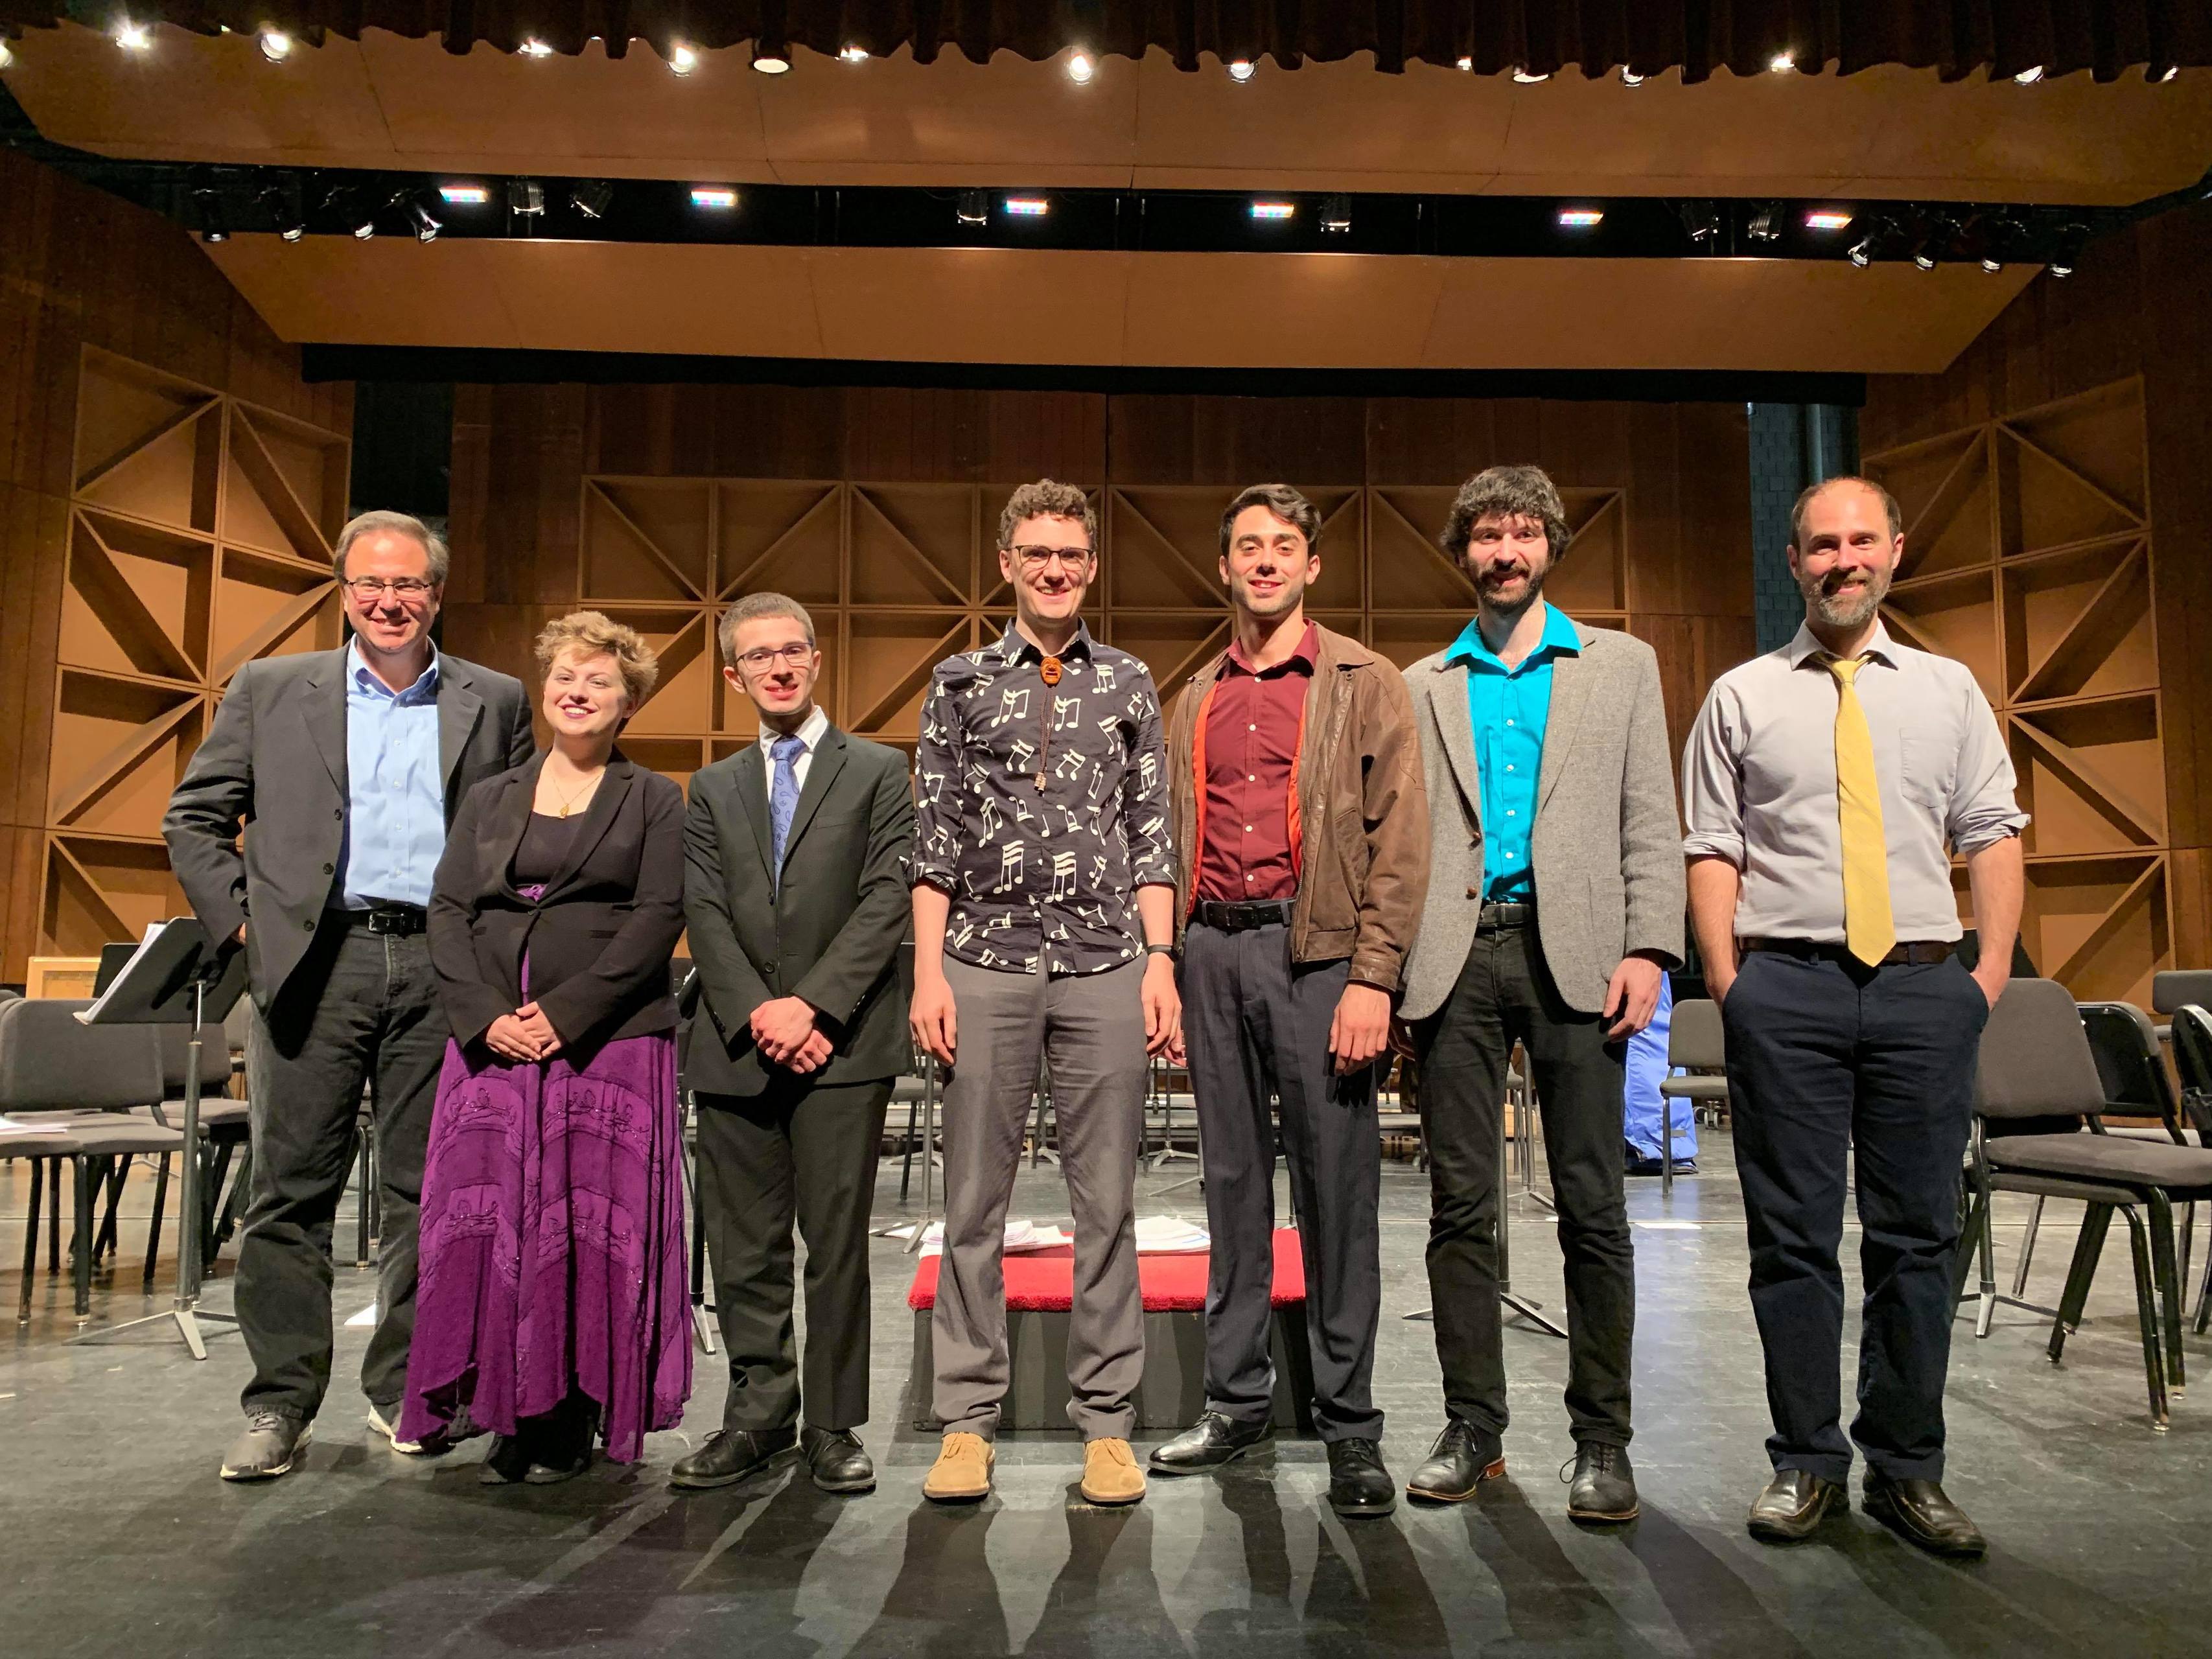 Winners of Toledo Symphony Orchestra Readings 2019